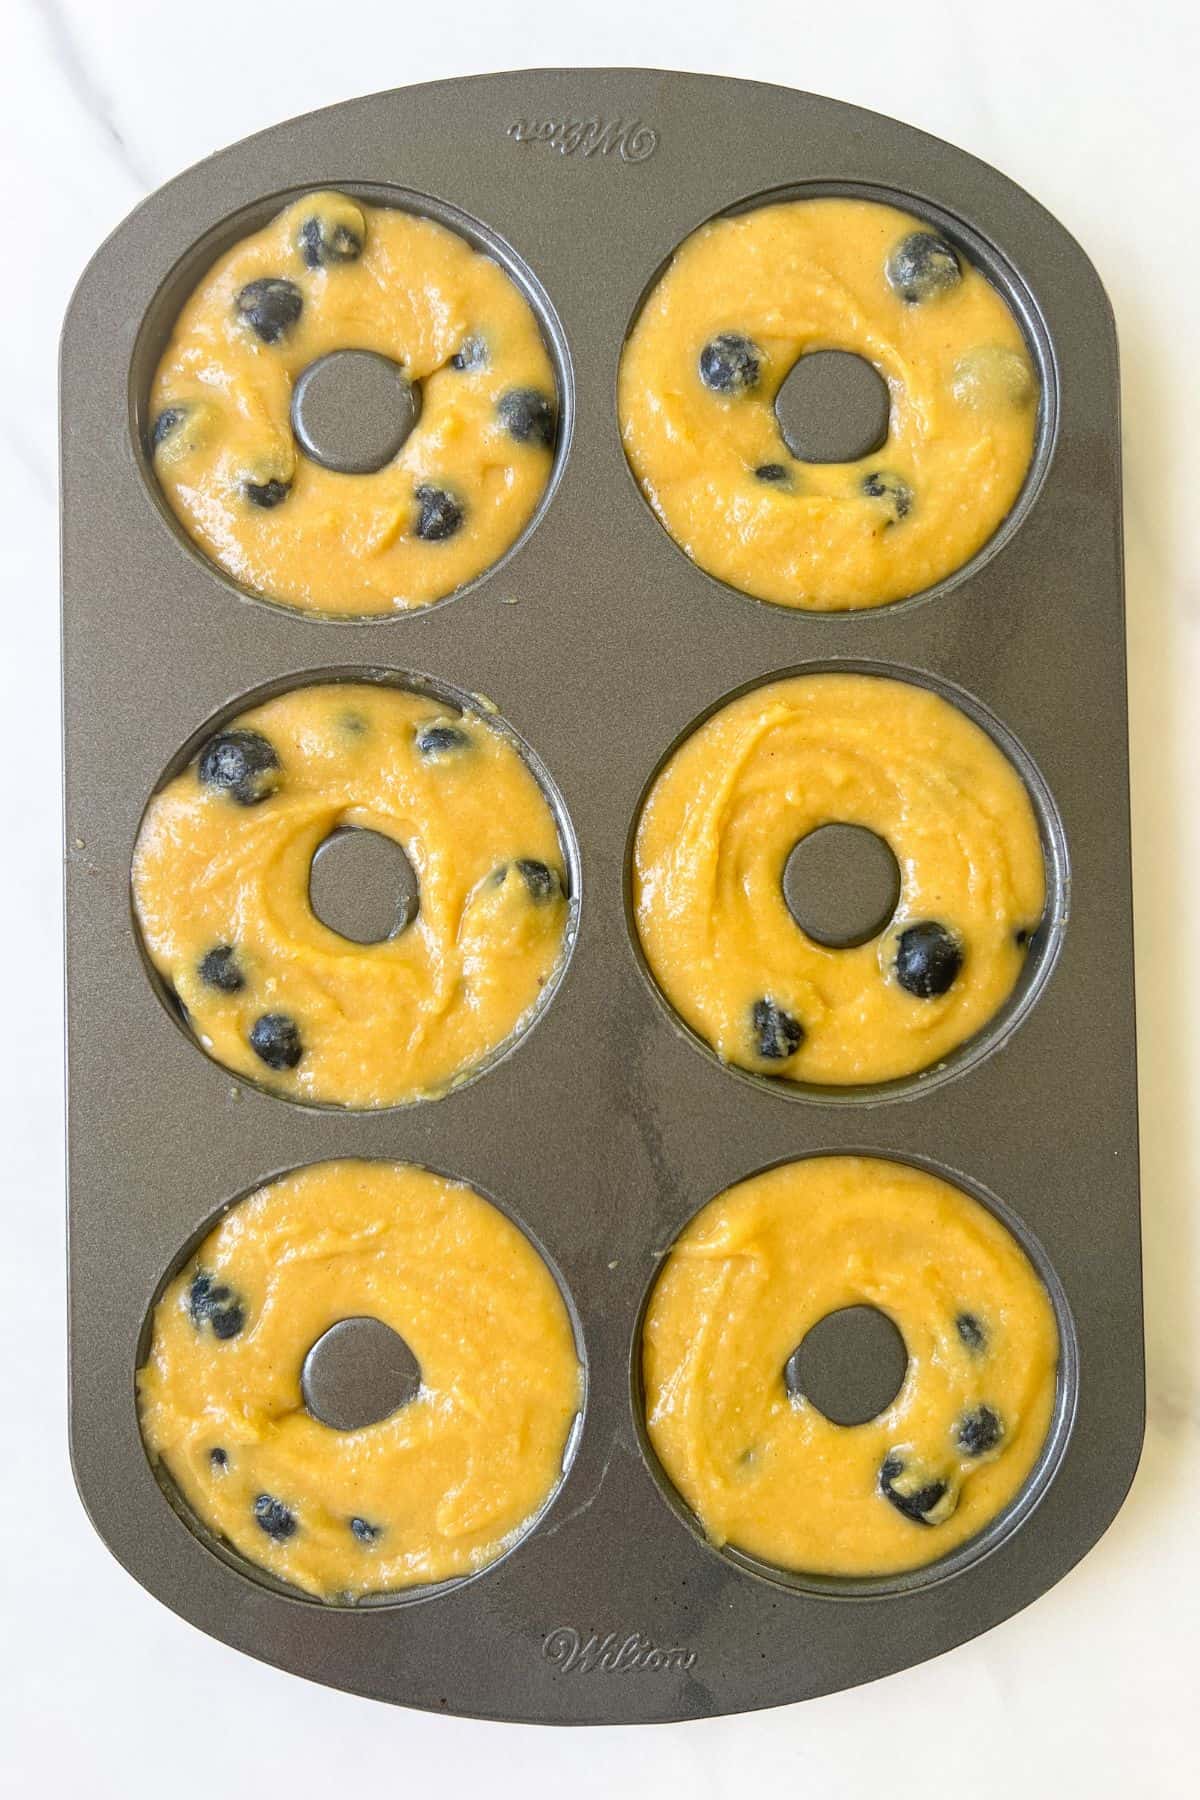 Blueberry cake donut batter poured into a donut pan.